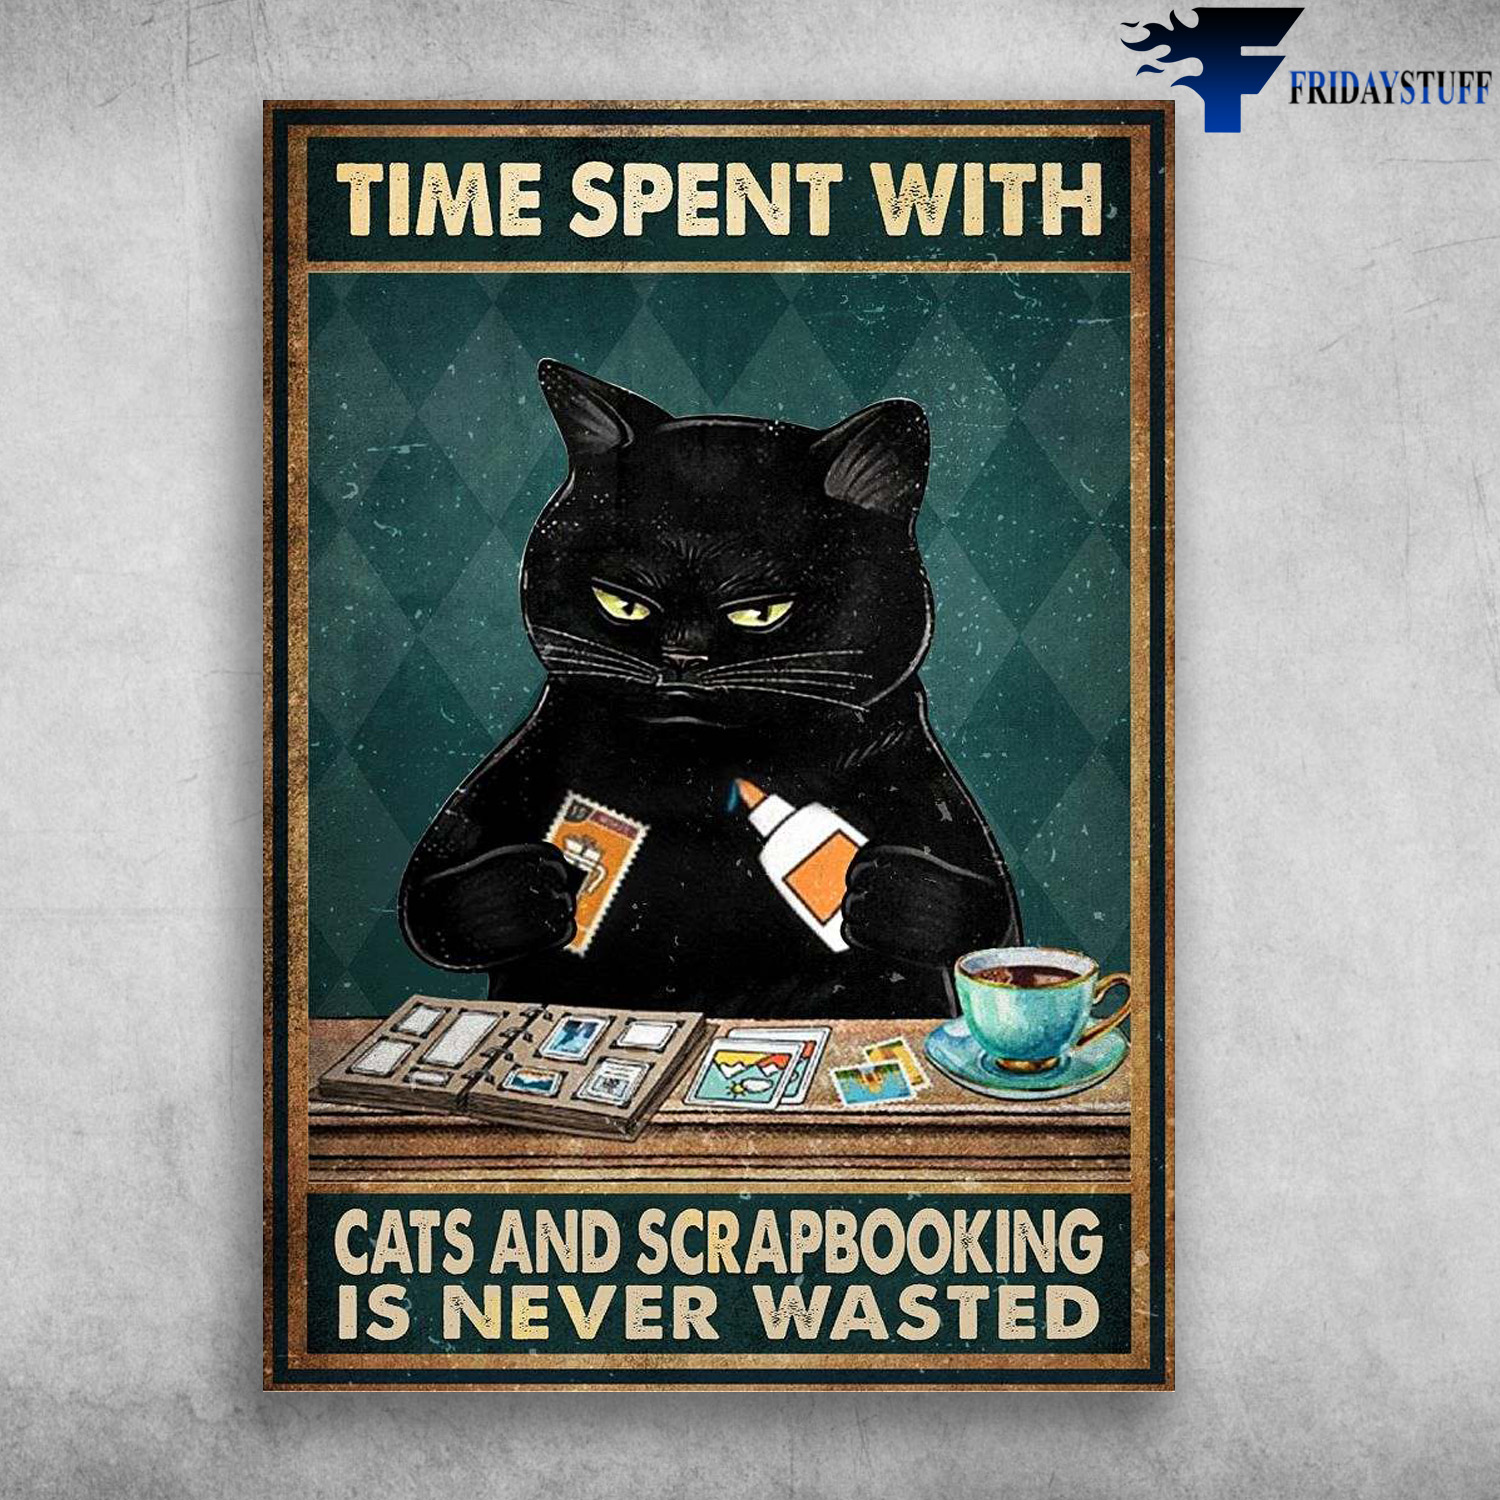 Black Cat Scrapbooking - Time Spent With Cats And Scrapbooking, Is Never Wasted